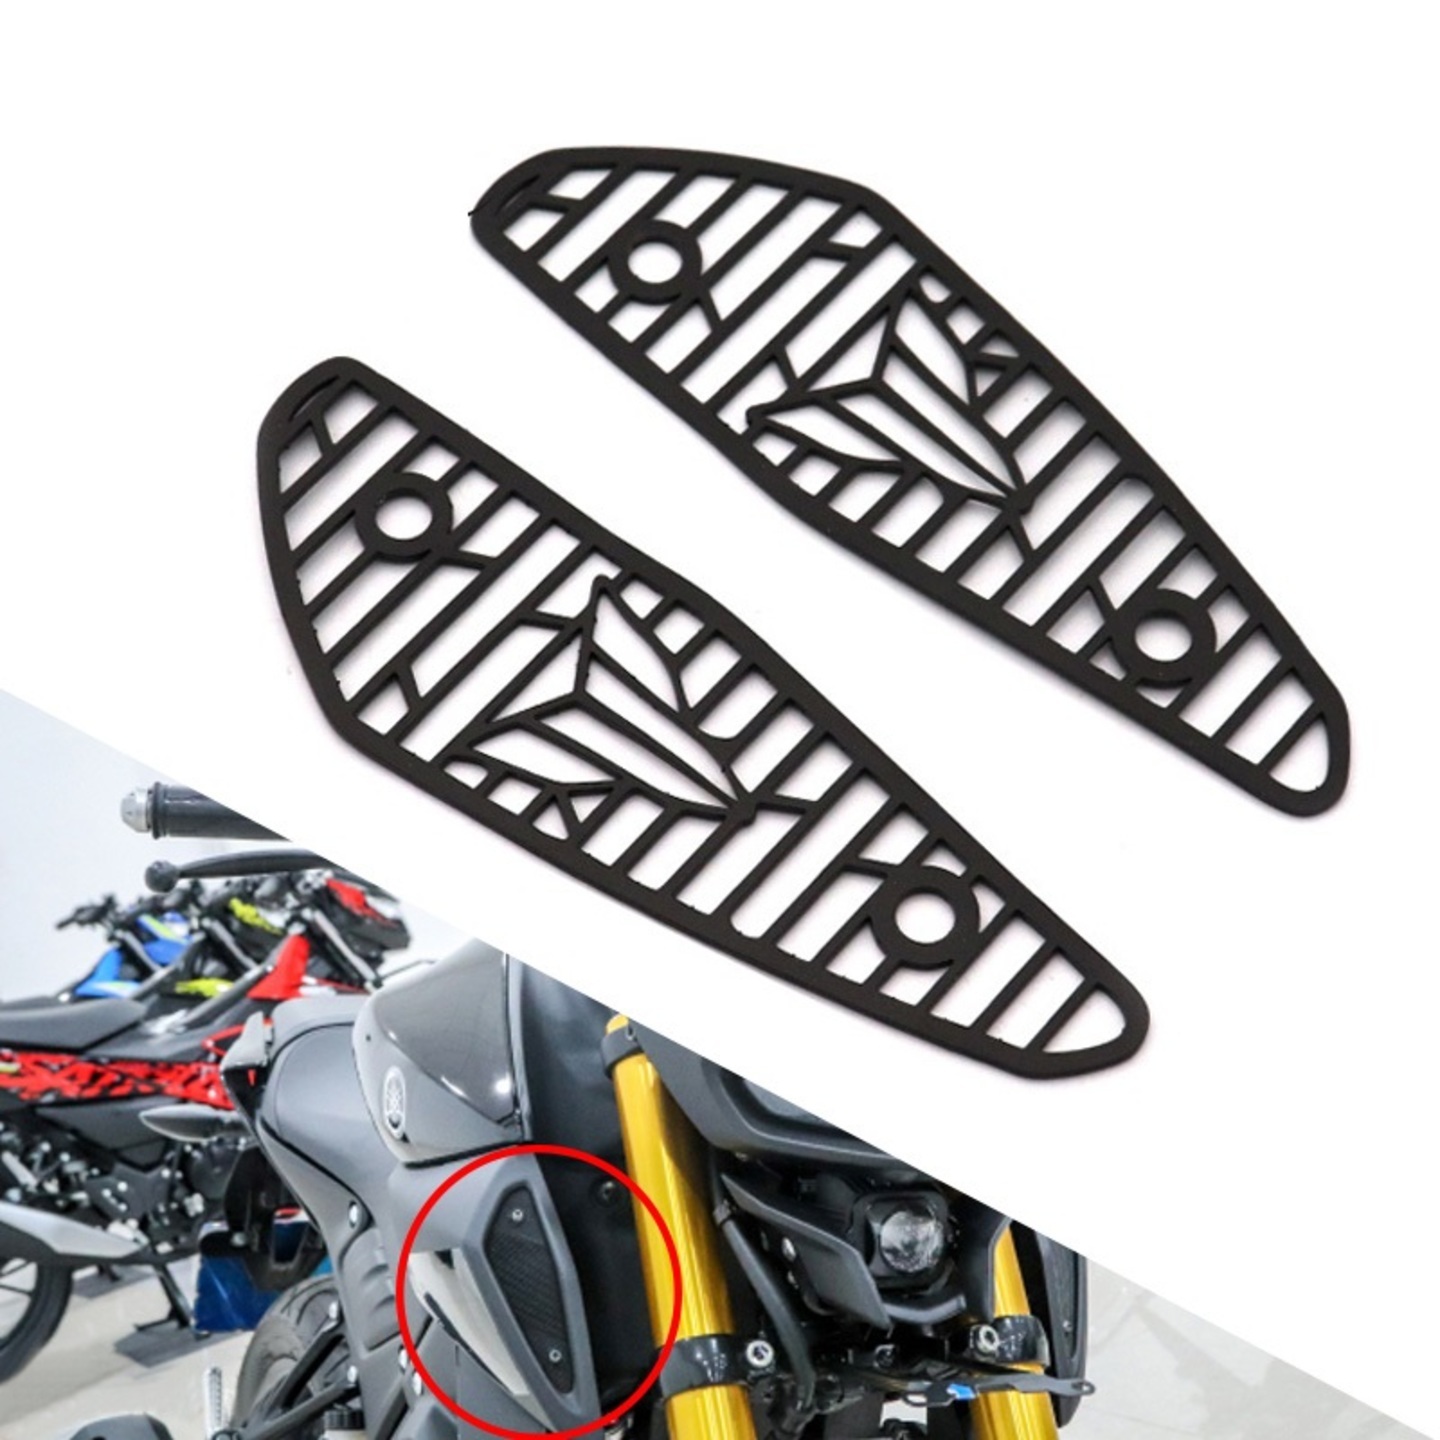 Yamaha MT15 intake air vents left right filter protection protective cover guard set